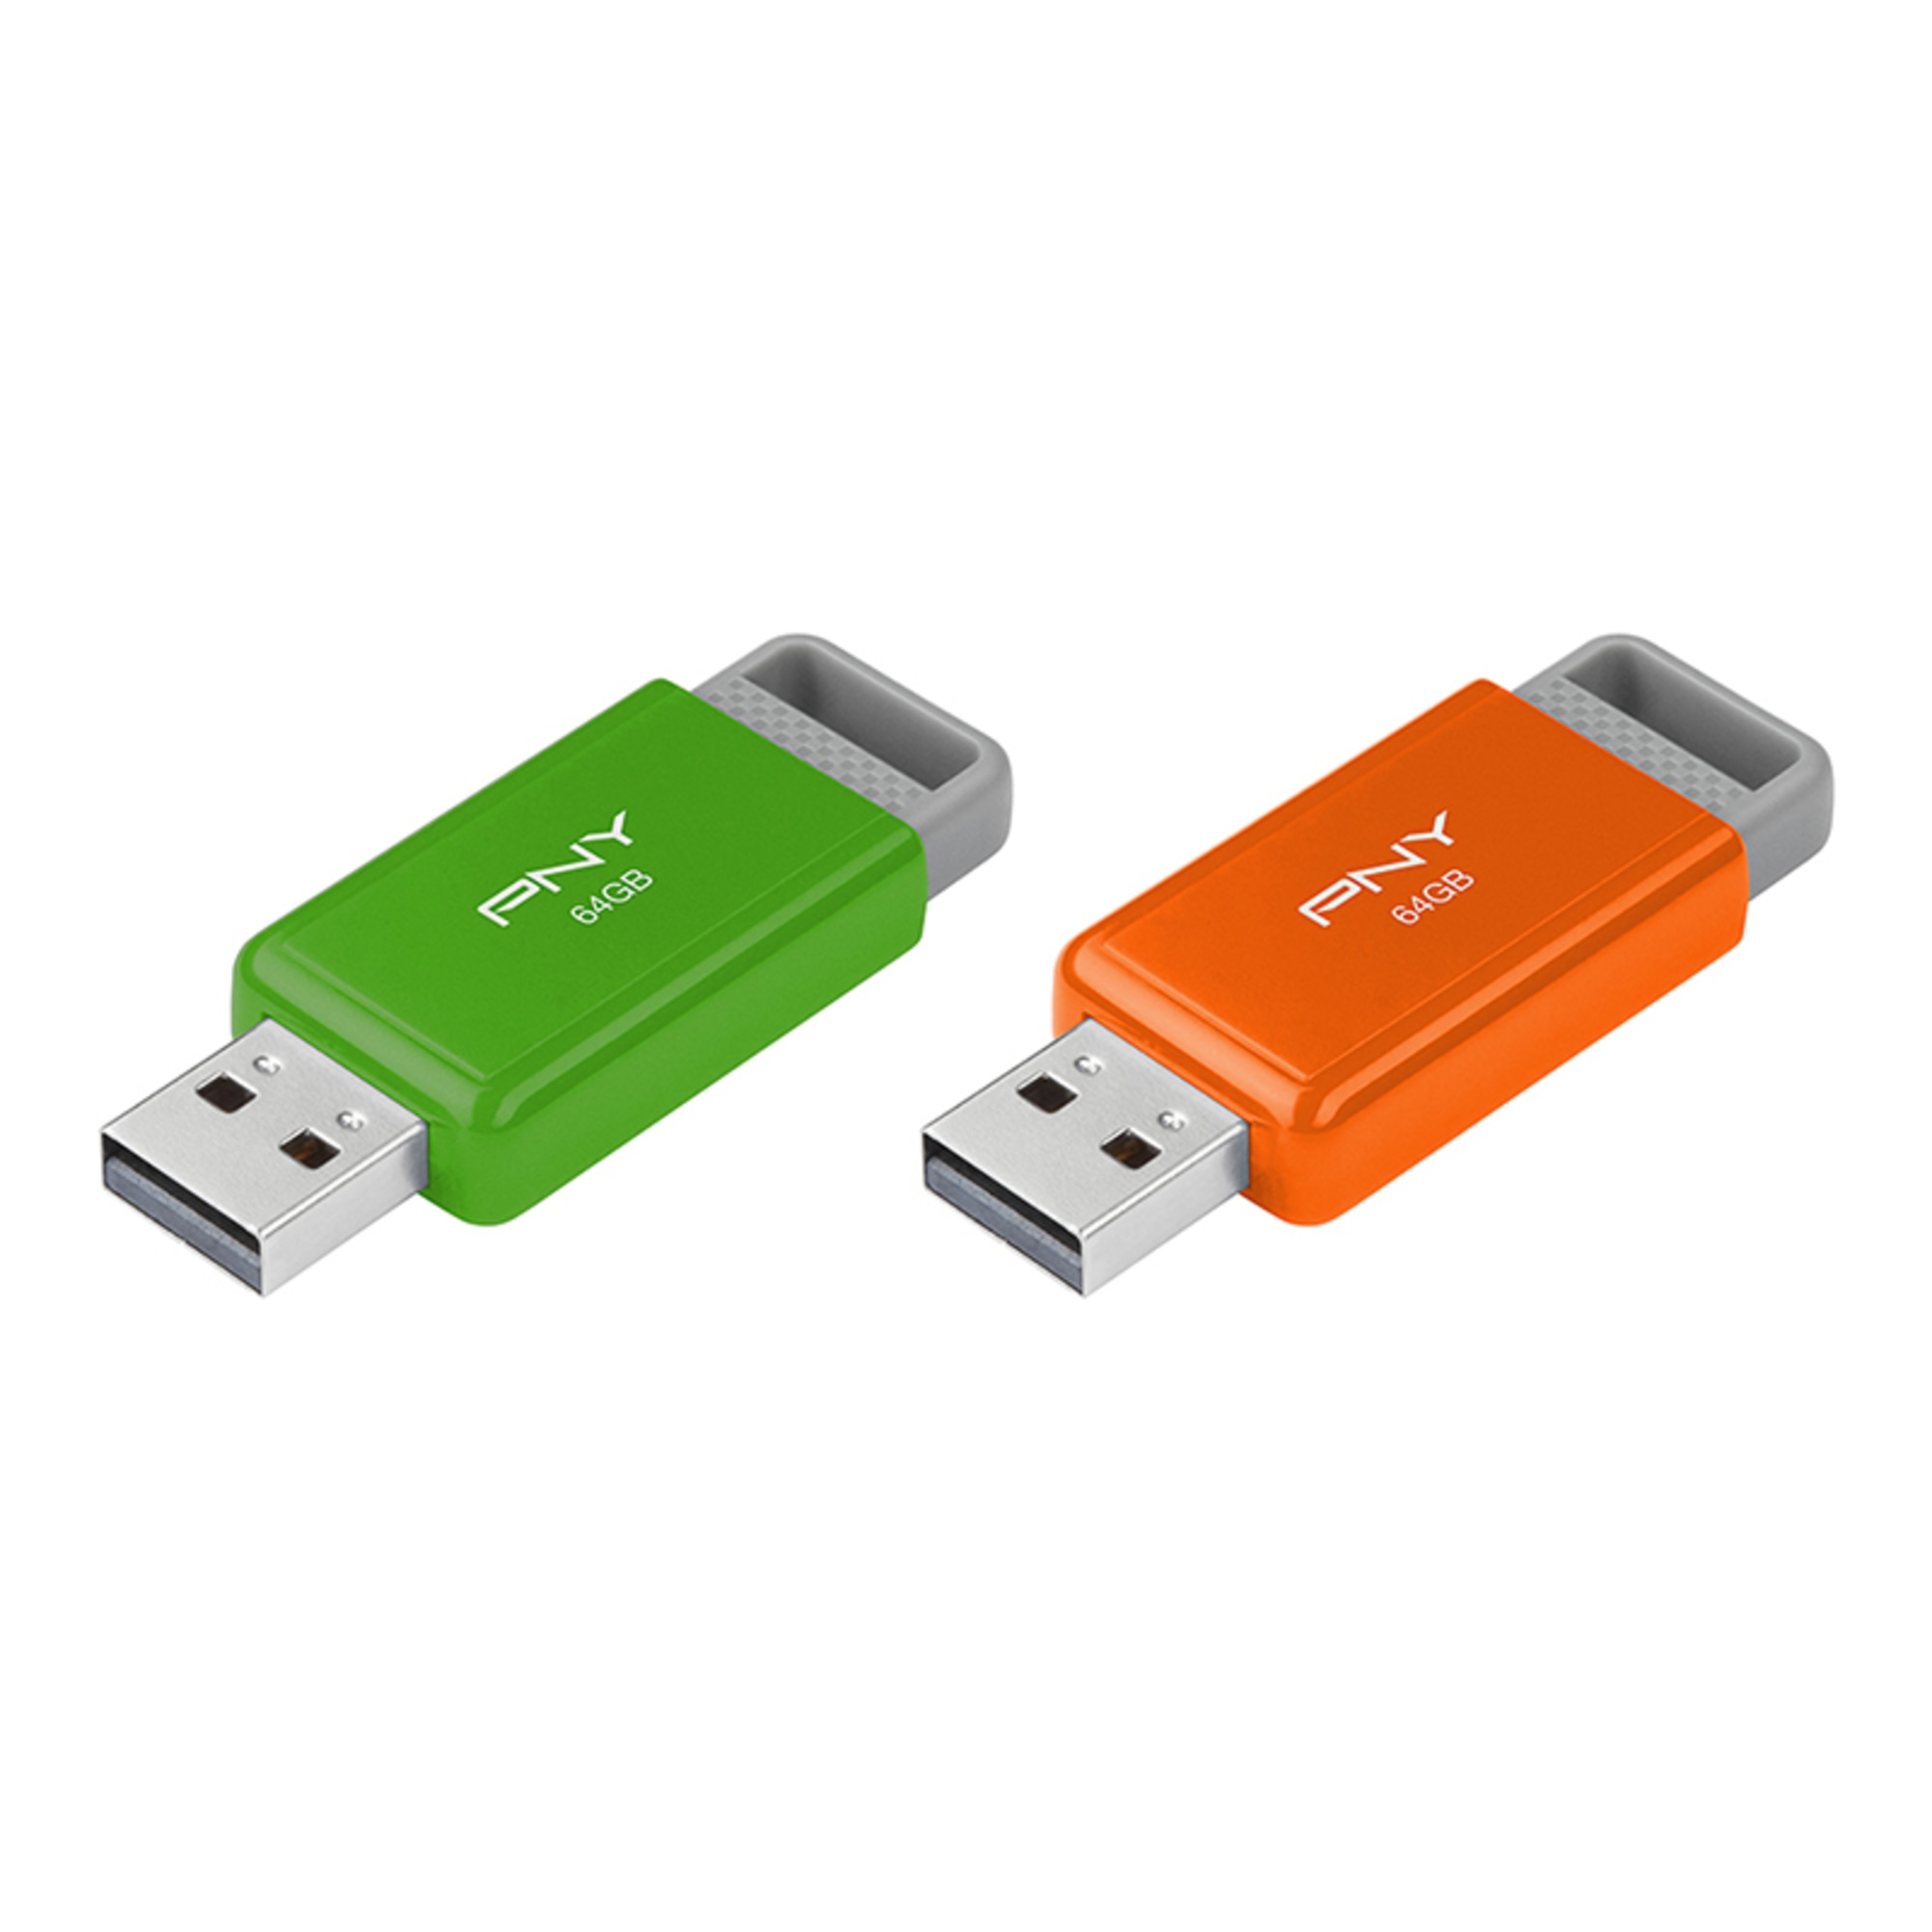 PNY USB 2.0 Flash Drives, 64GB, Pack Of 2 Flash Drives - image 2 of 7